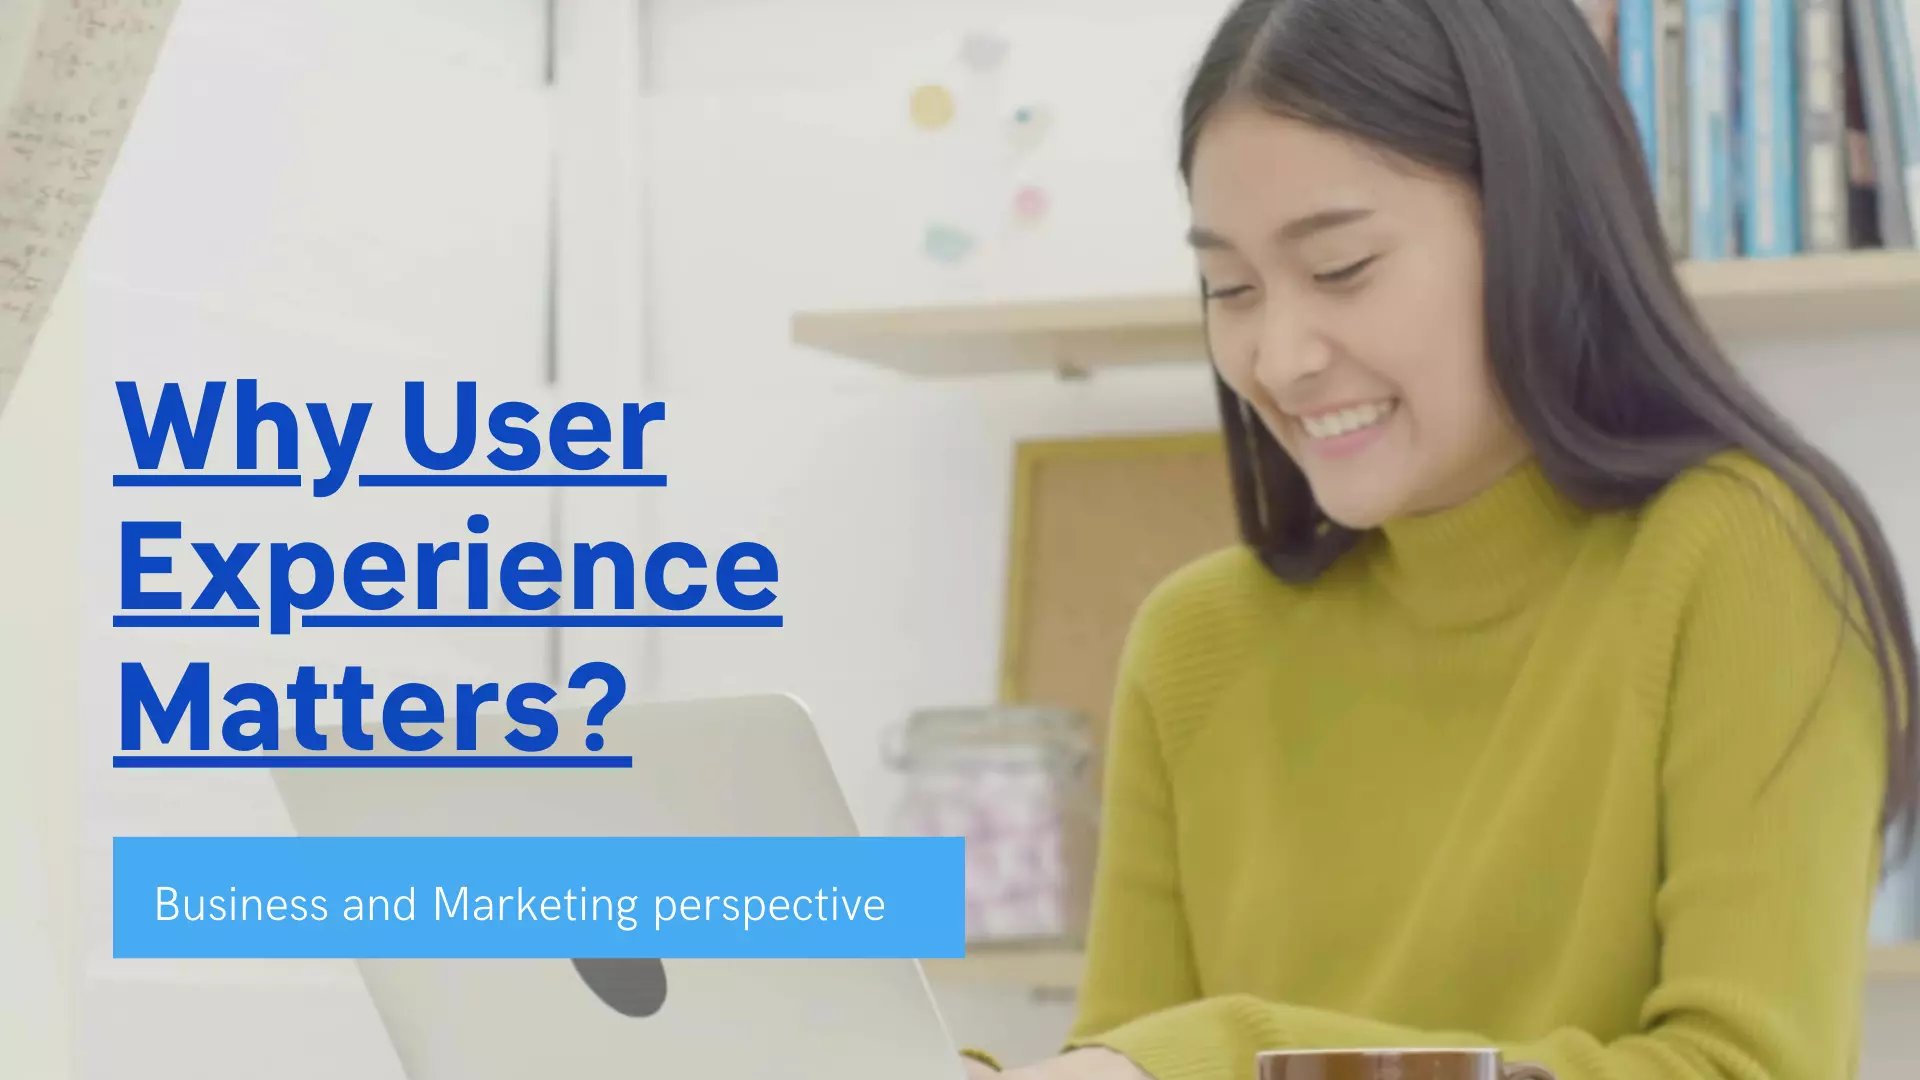 Why User Experience Matters?